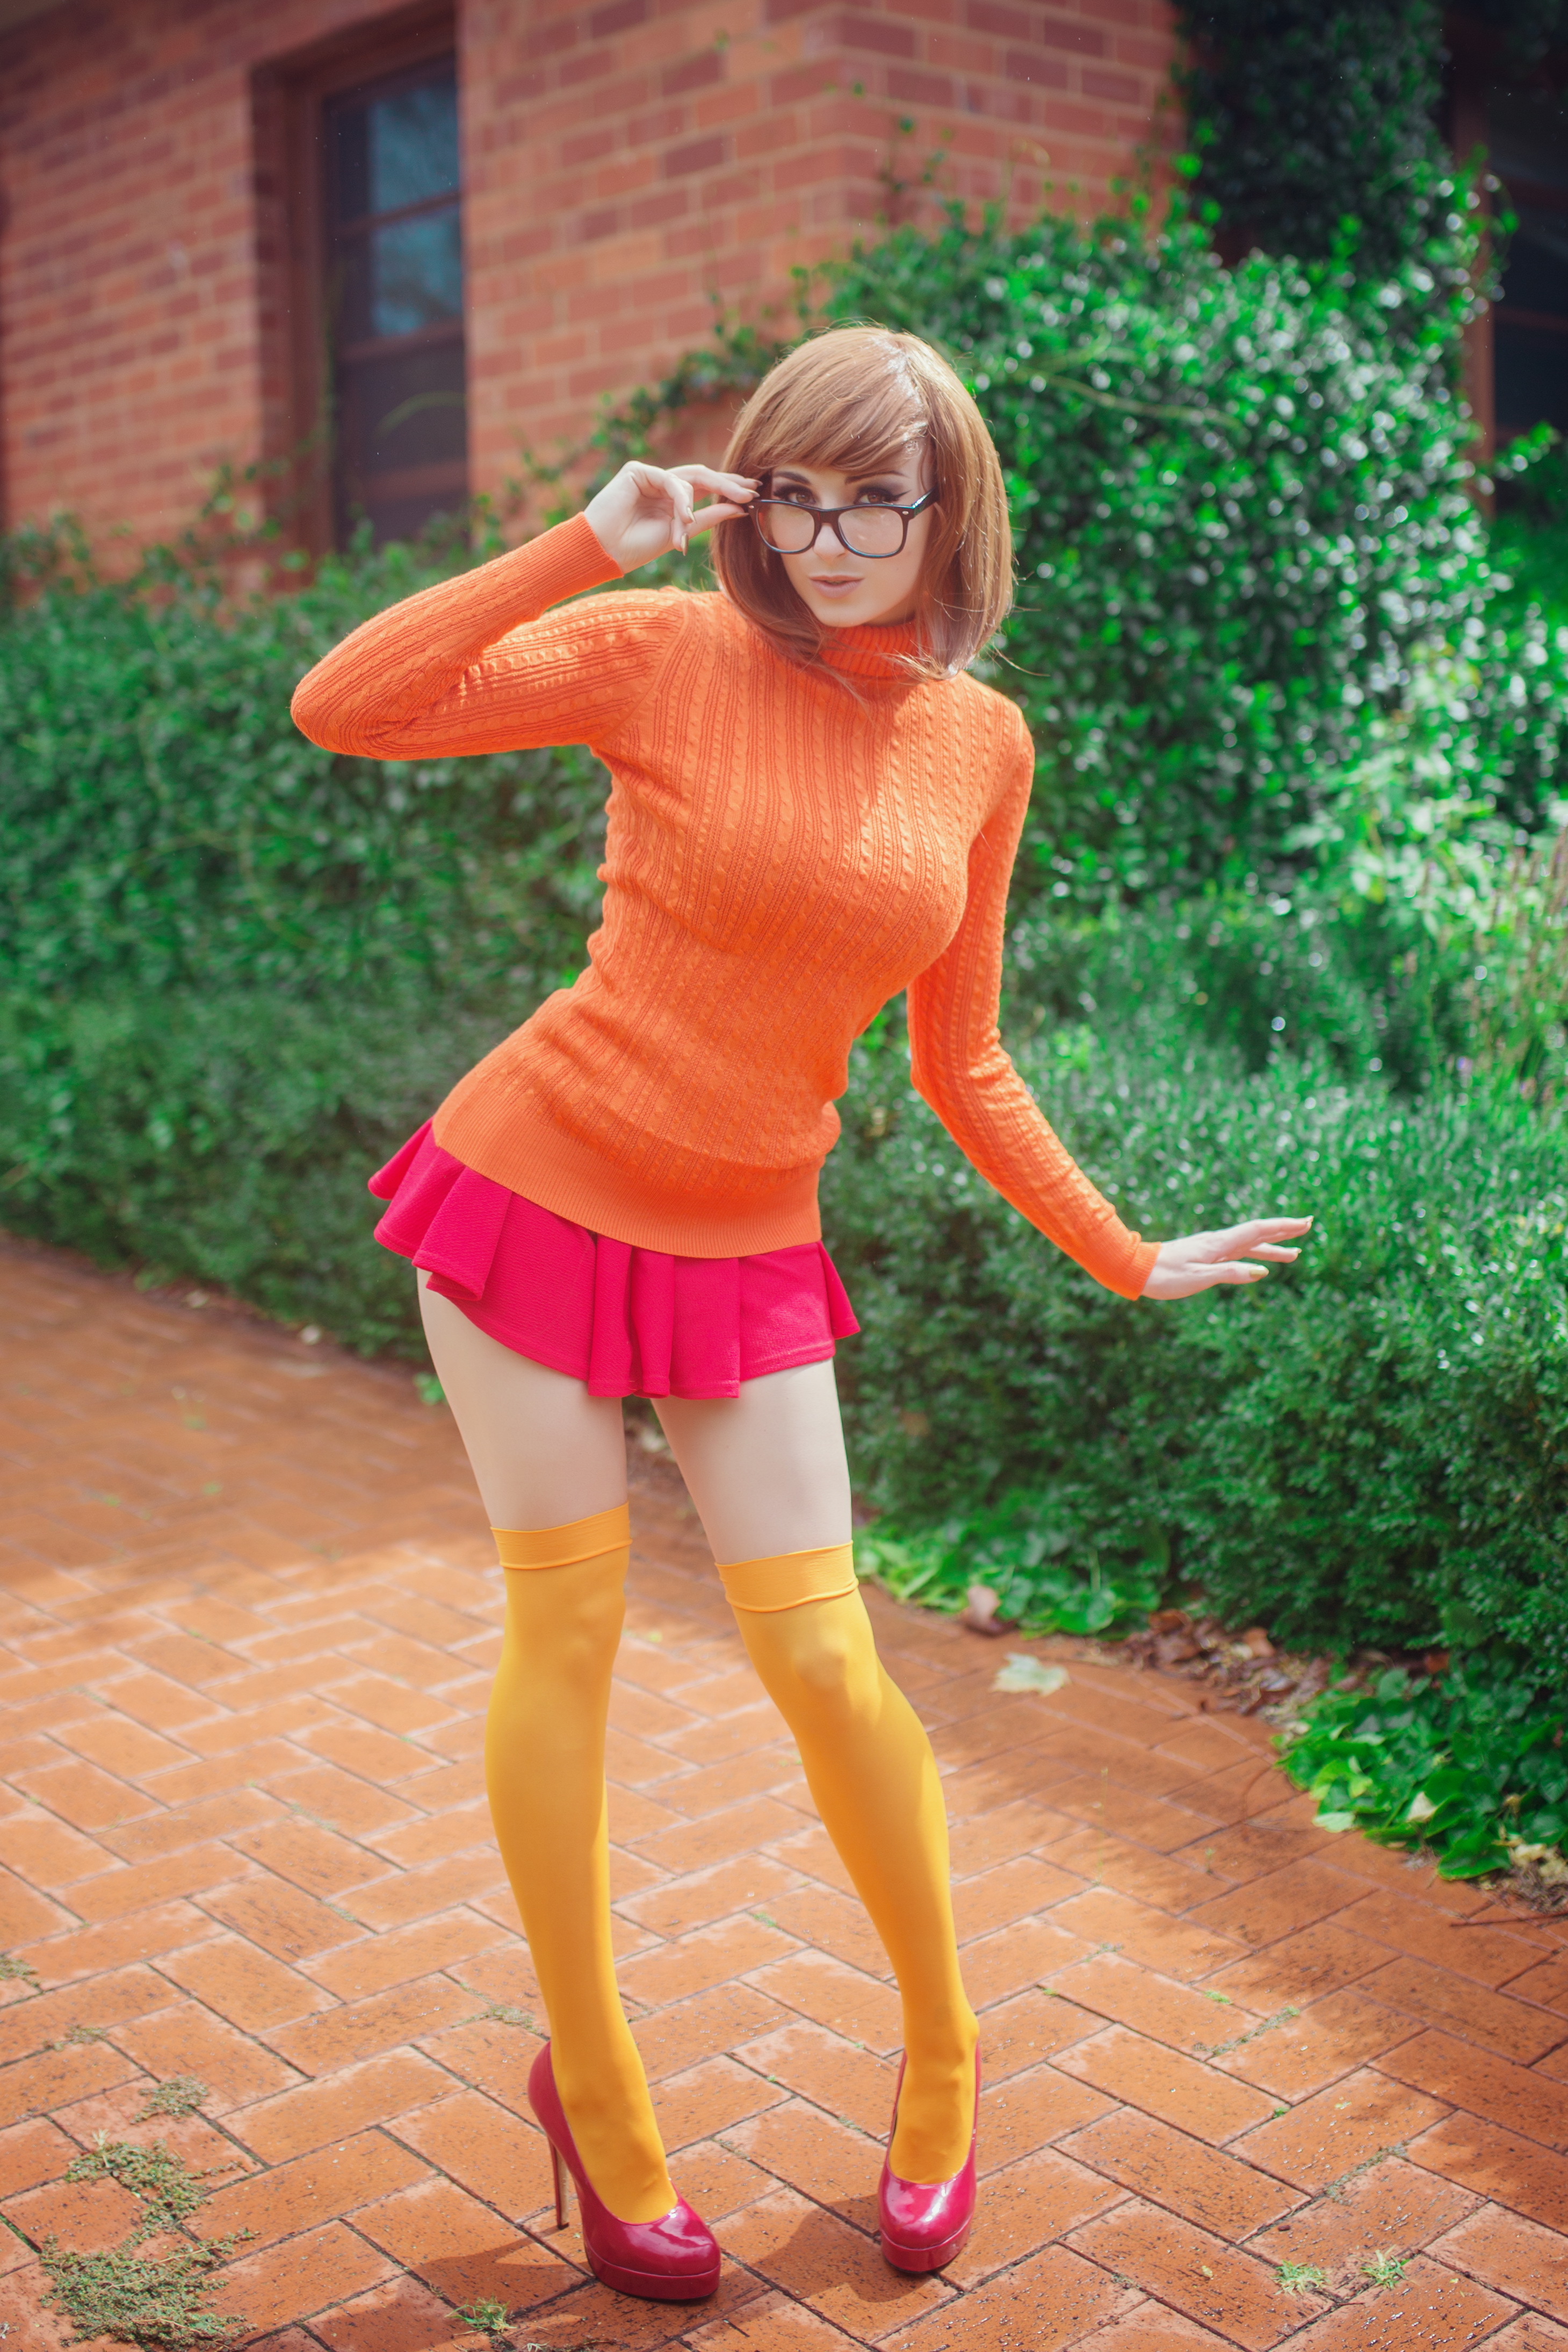 People 2919x4378 Kayla Erin women model women outdoors cosplay Scooby-Doo Velma Dinkley women with glasses turtlenecks sweater miniskirt pink shoes high heels glasses brunette colorful stockings pink skirt zettai ryouiki thigh-highs shoes standing